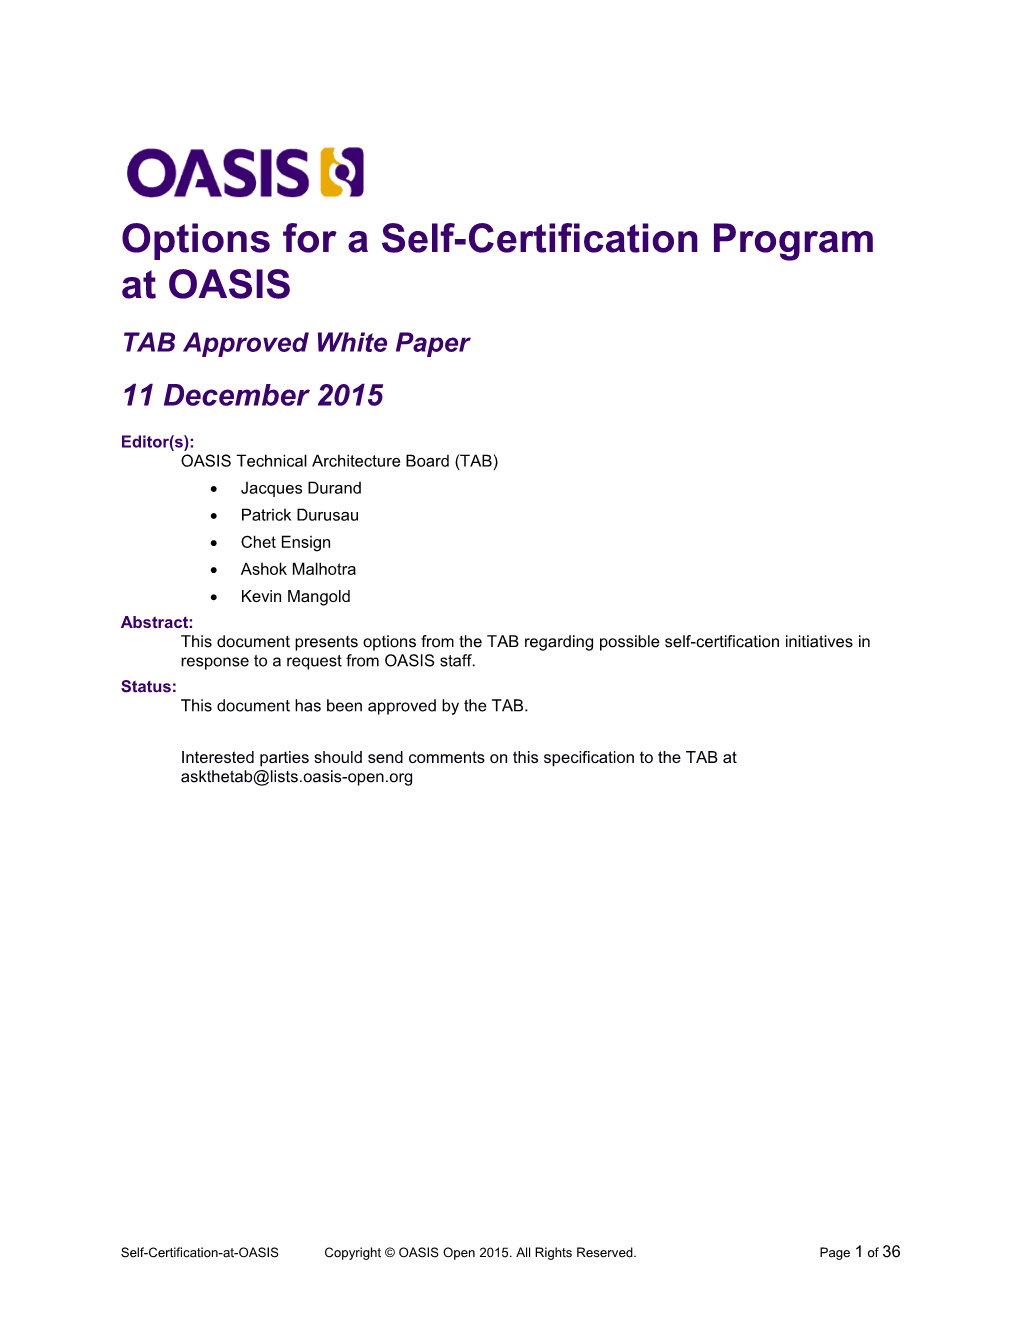 Options for a Self-Certification Program at OASIS